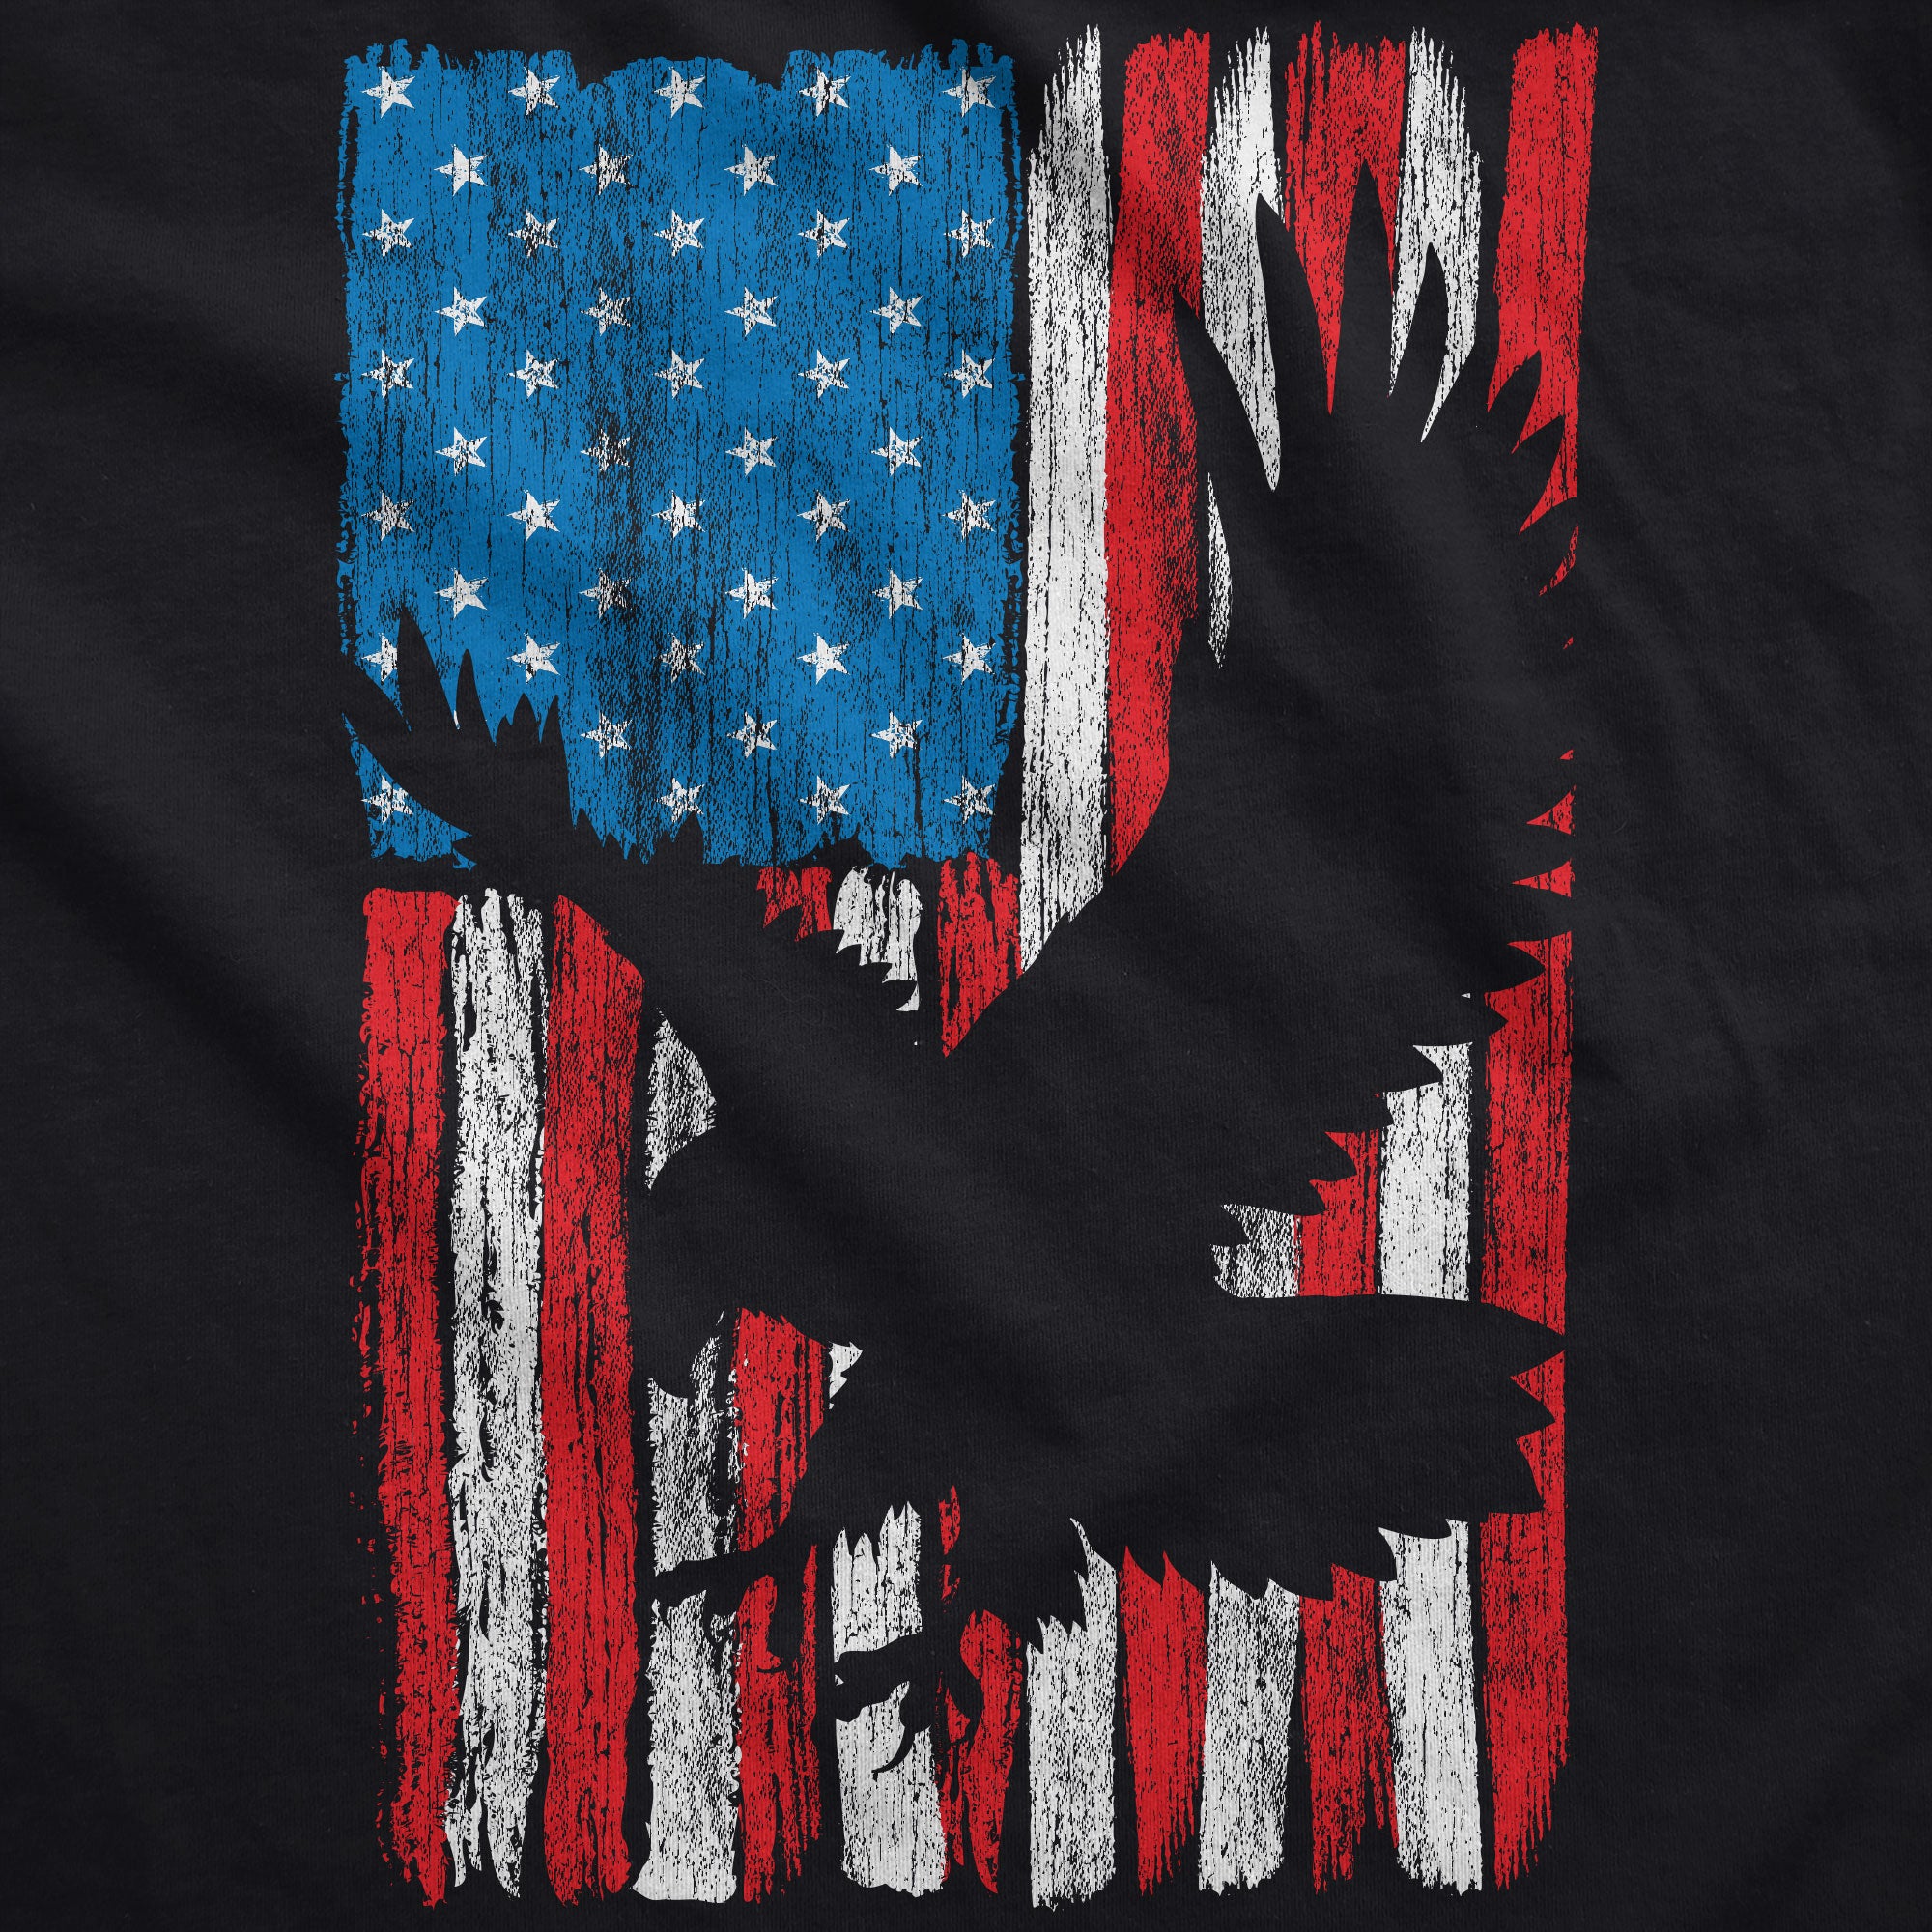 Funny Black - Eagle In Flag Eagle In Flag Mens Tank Top Nerdy Fourth Of July Tee